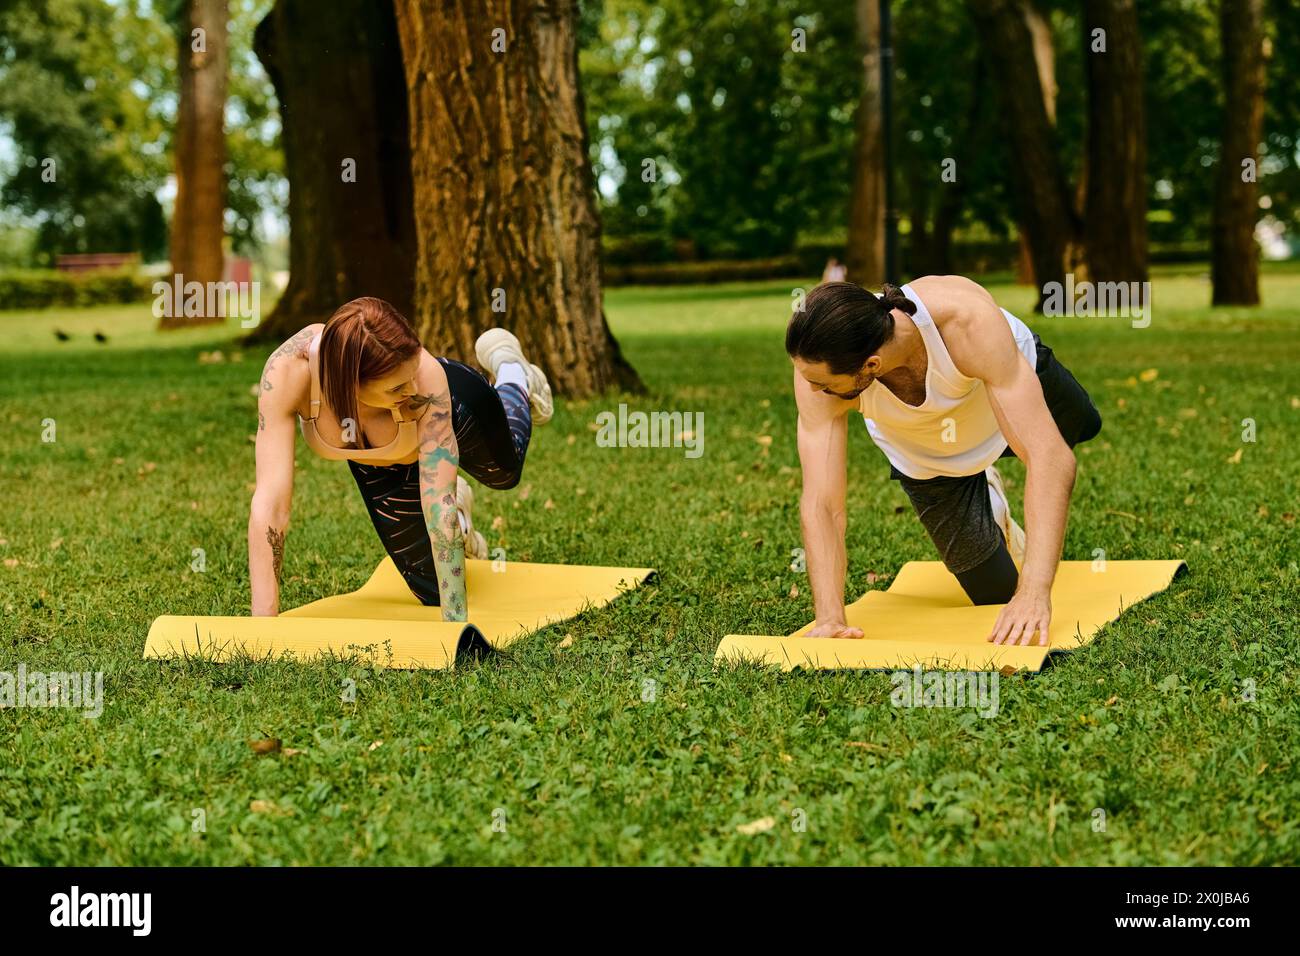 A man and woman in sportswear engage in partner yoga poses with determination and motivation during an outdoor session. Stock Photo